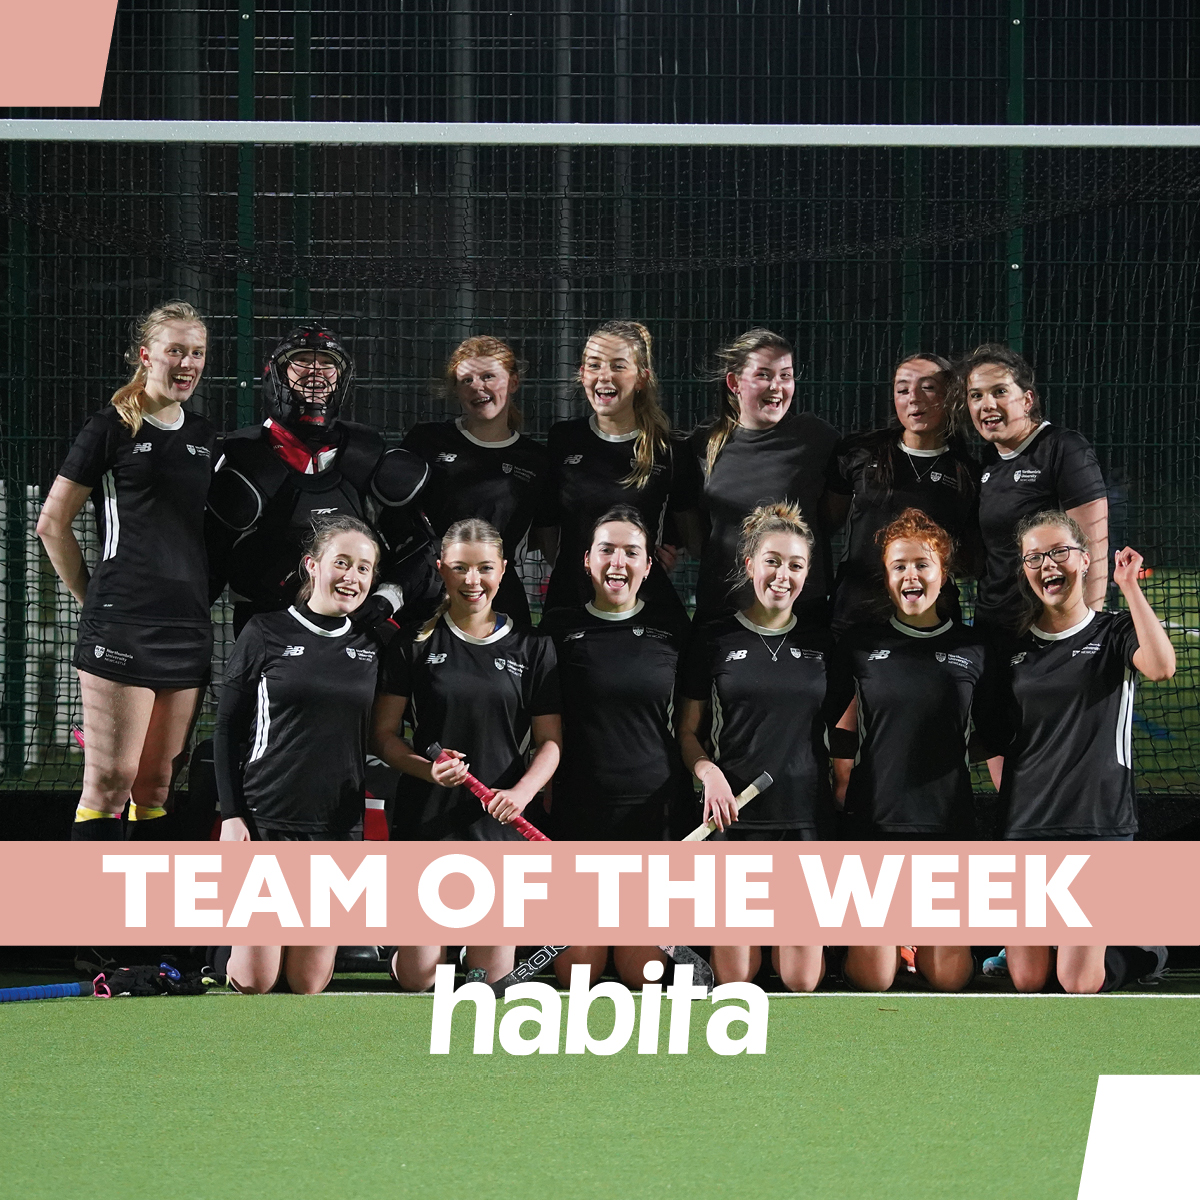 TEAM OF THE WEEK Sponsored by @habitanewcastle This weeks winners as selected by VP SPORT Harvey Burn are… 🏑HOCKEY W3🏑 The 3s continue their unbeaten run this season, and take a MASSIVE 10-0 victory over York St John! Well done girls!!